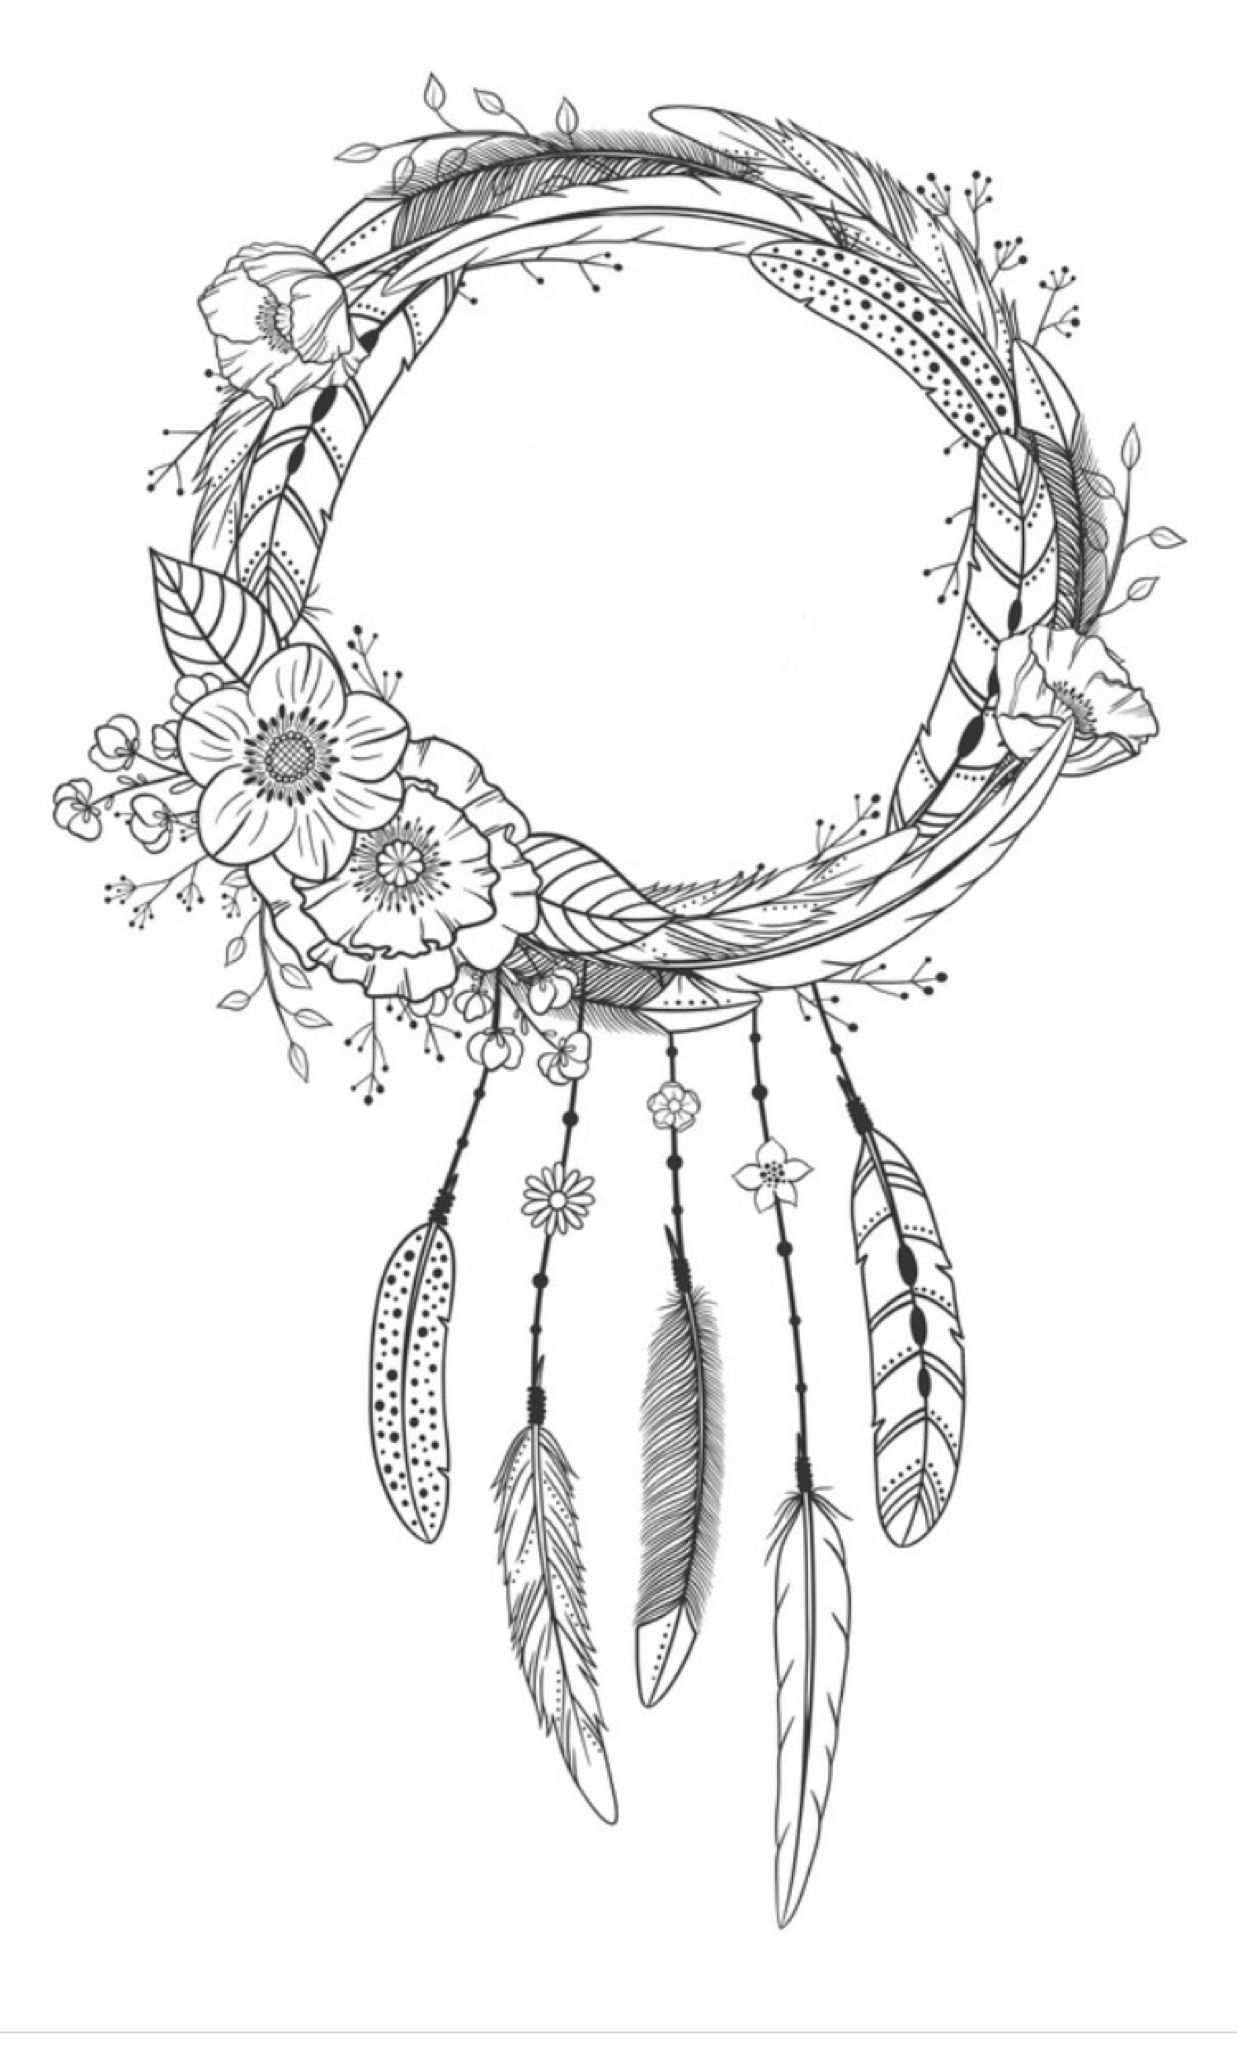 Dreamcatcher Coloring Page Coloring Pages For Adults Dreamcatcher Free Printable Colo